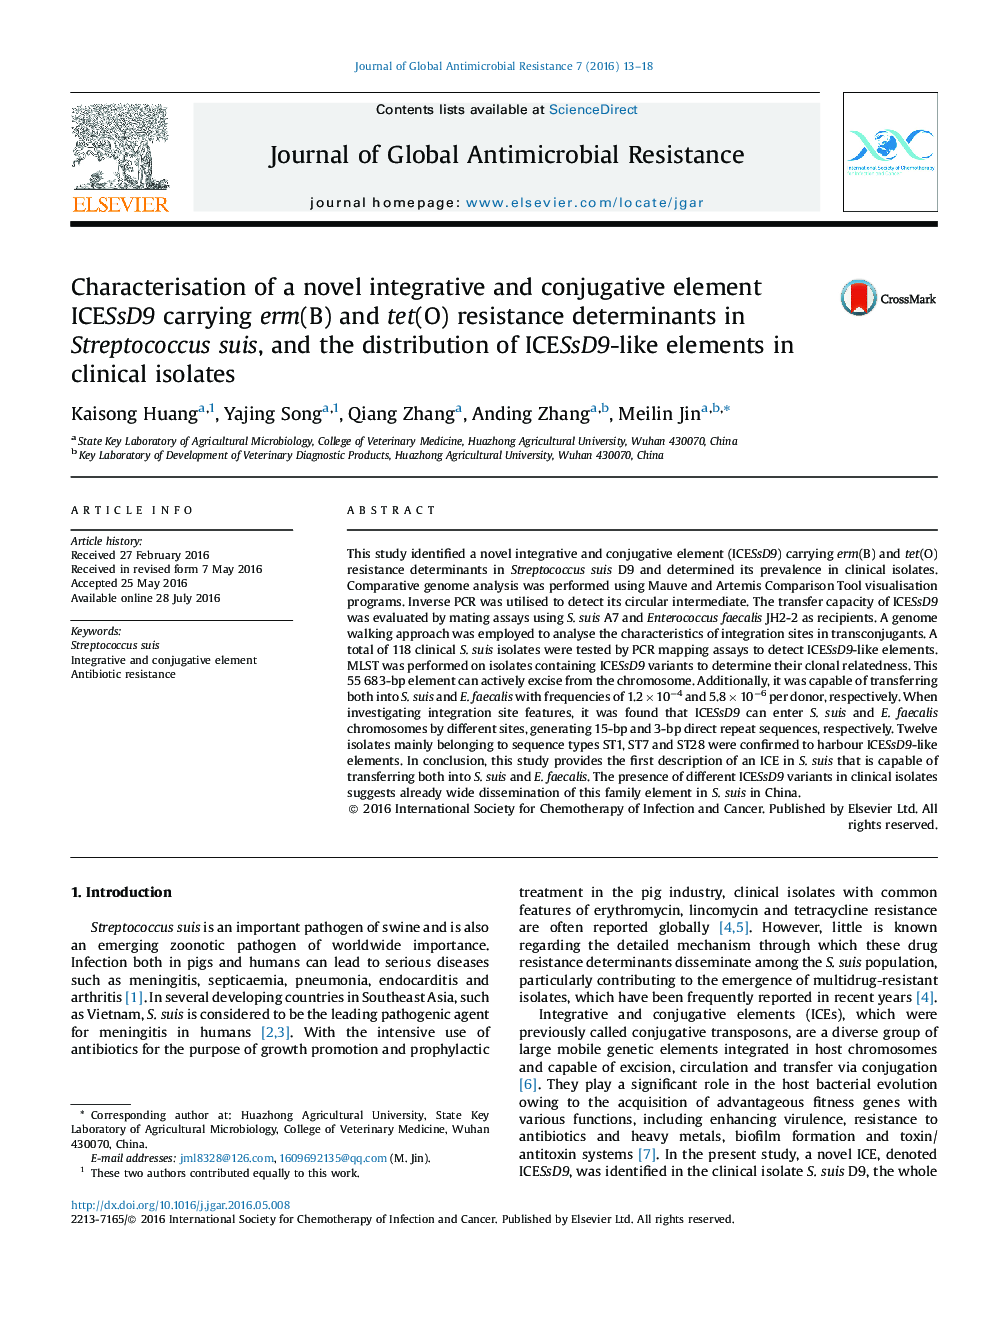 Characterisation of a novel integrative and conjugative element ICESsD9 carrying erm(B) and tet(O) resistance determinants in Streptococcus suis, and the distribution of ICESsD9-like elements in clinical isolates